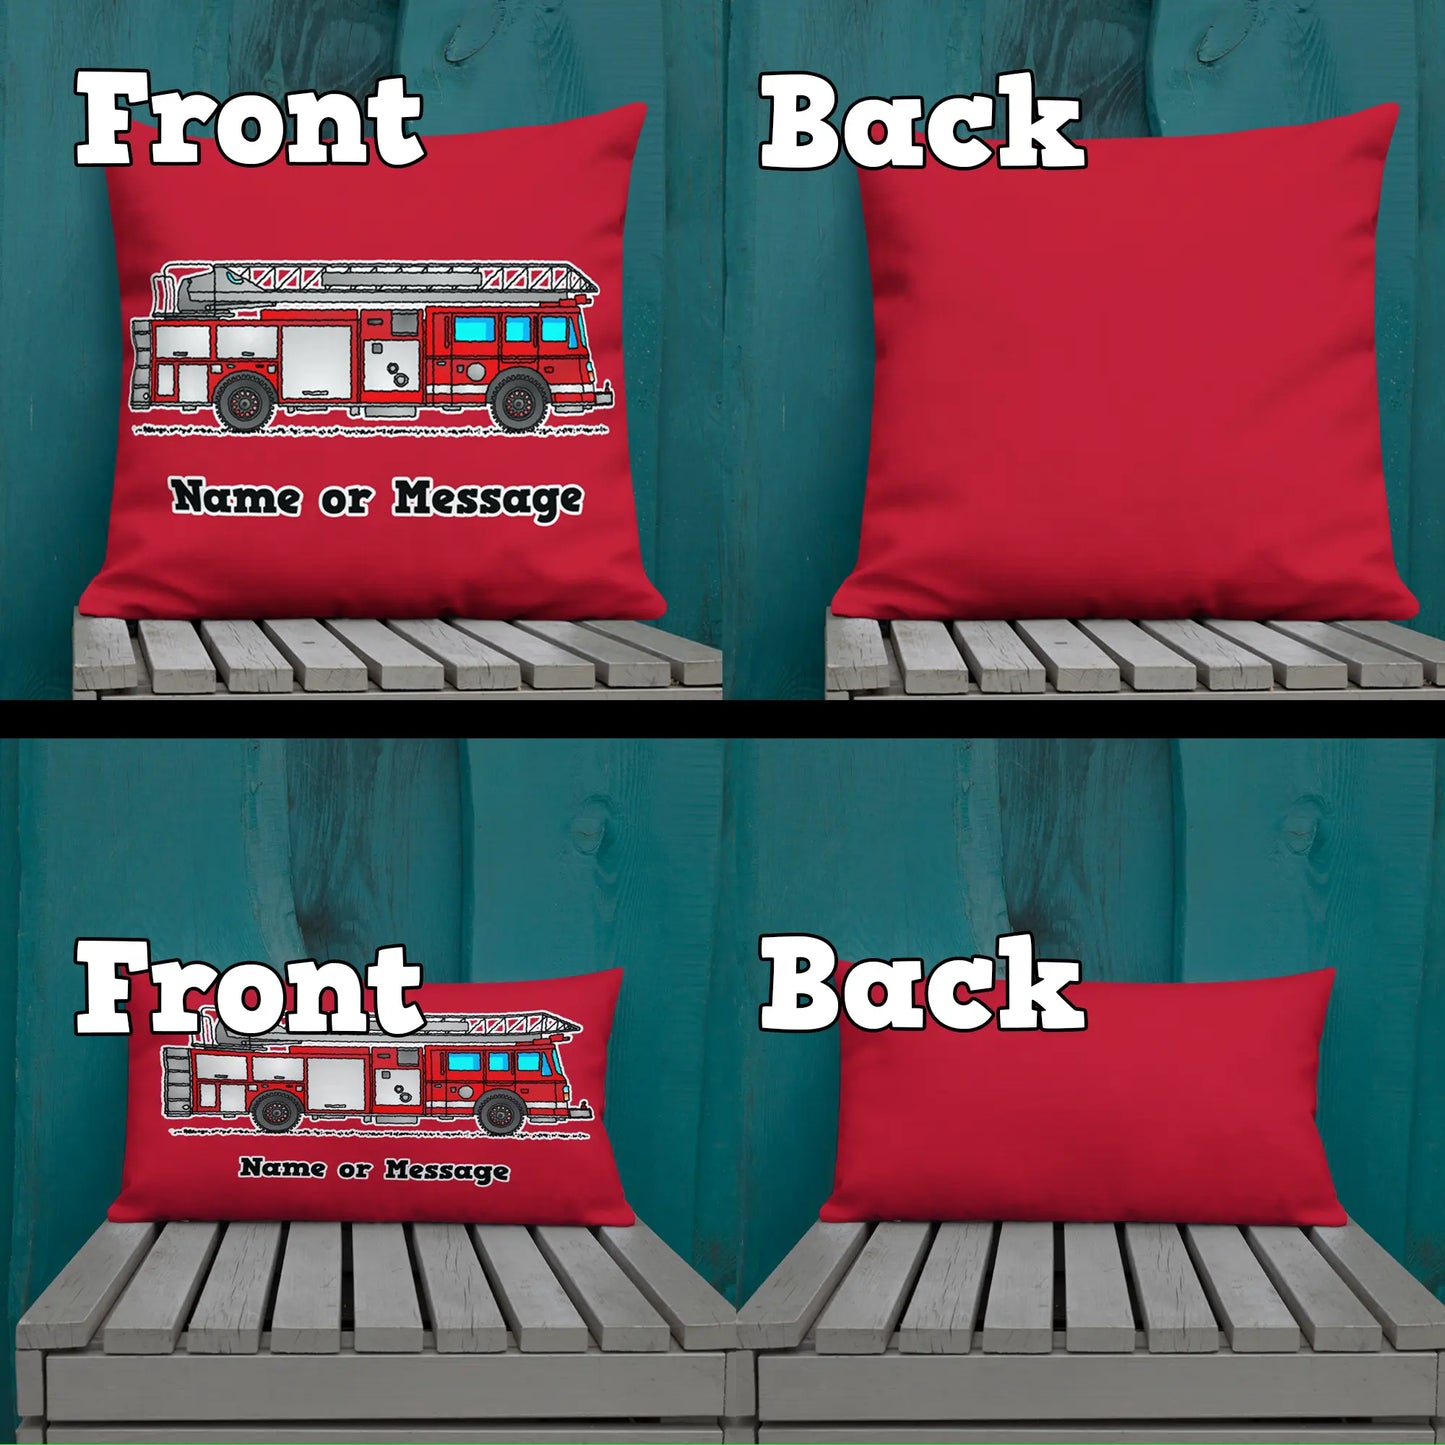 Red Fire Truck Throw Pillow Cushion. Firefighter Engine Vehicle P002